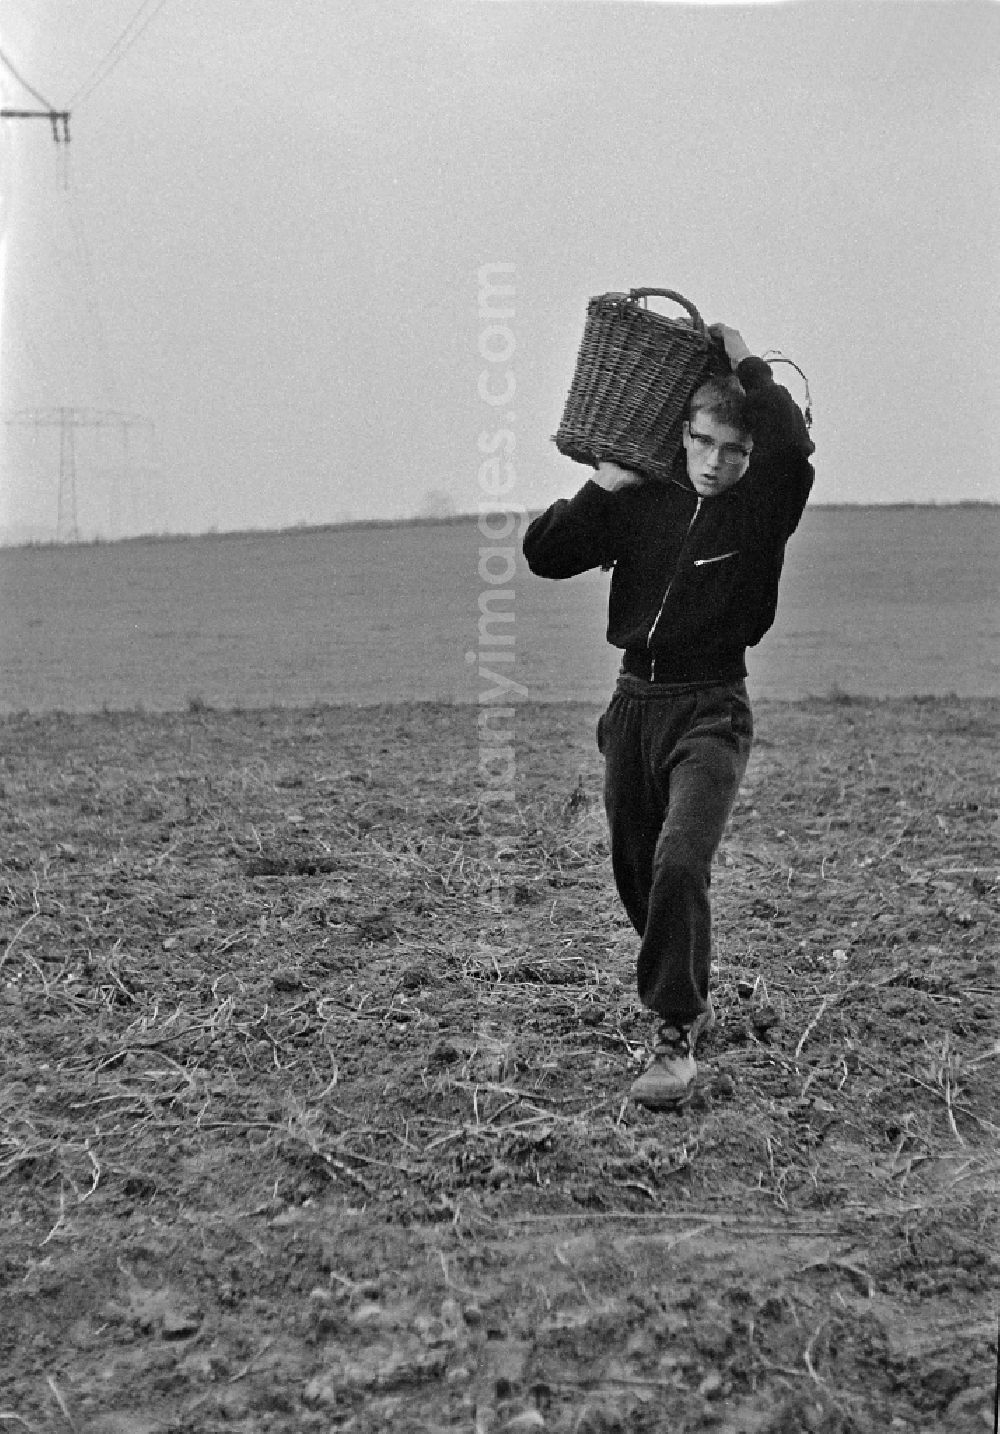 GDR image archive: Werneuchen - Potato harvesting in a field by 9th grade students in Werneuchen, Brandenburg in the territory of the former GDR, German Democratic Republic